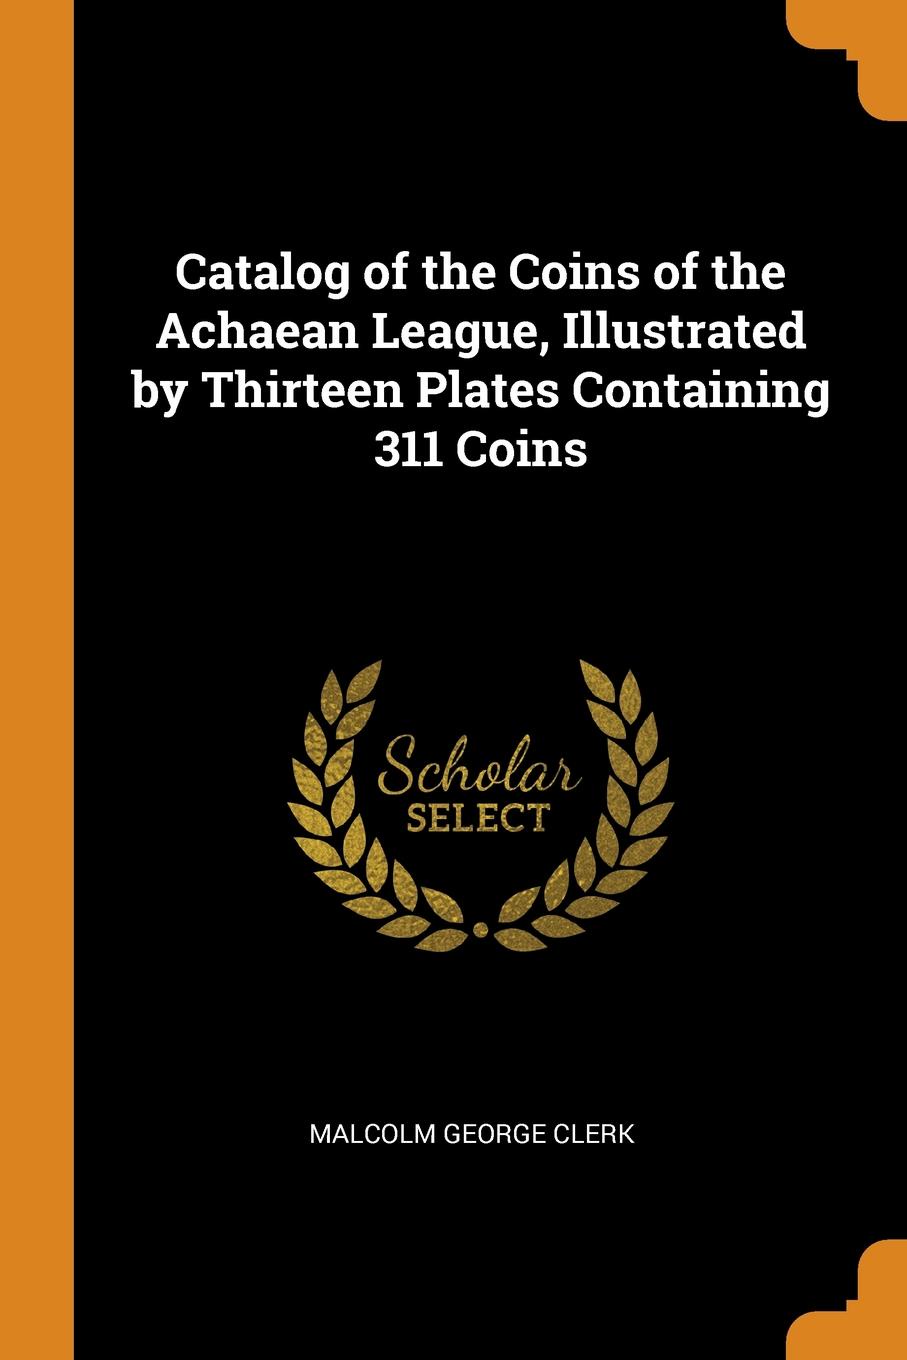 Catalog of the Coins of the Achaean League, Illustrated by Thirteen Plates Containing 311 Coins